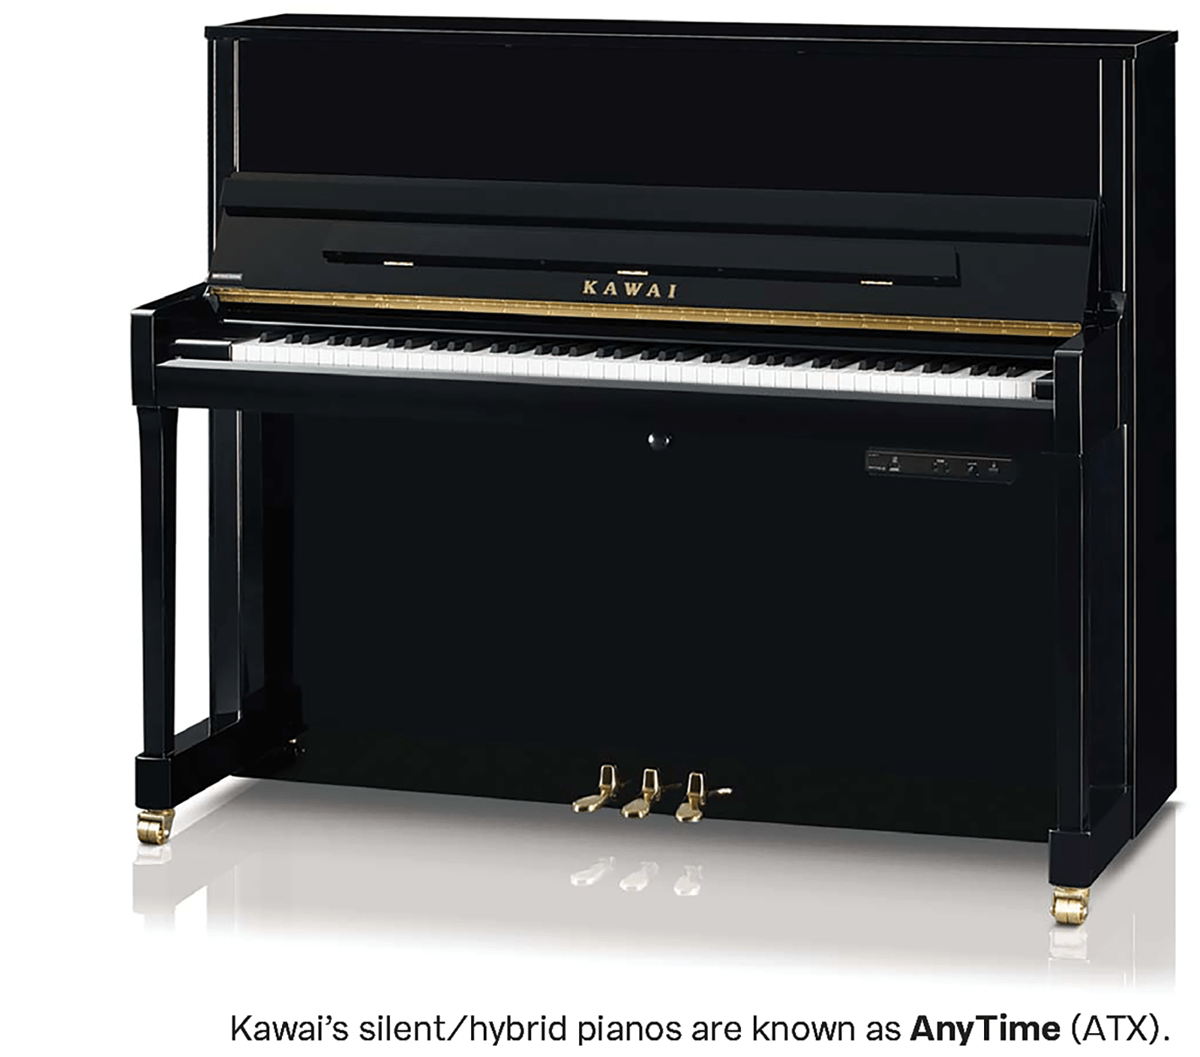 Kawai’s silent/hybrid pianos are known as AnyTime (ATX).